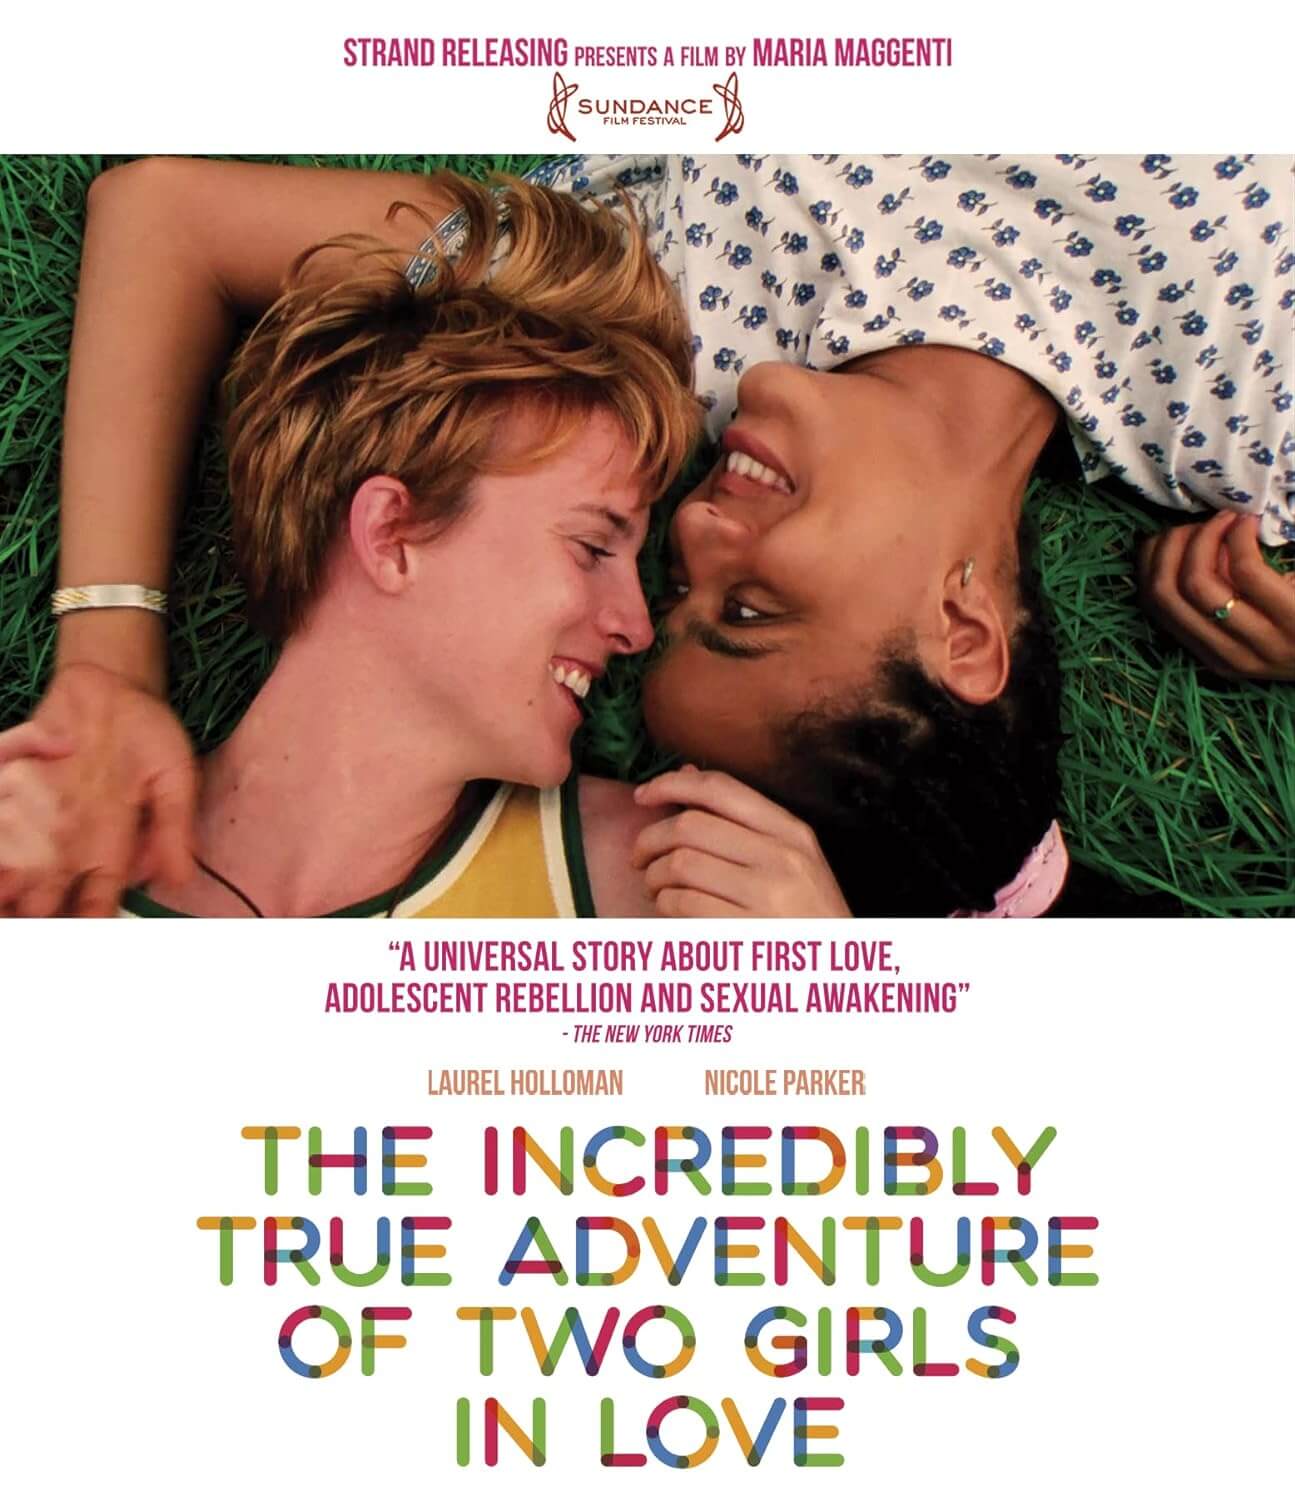 "The Incredibly True Adventure of Two Girls in Love" (1995)